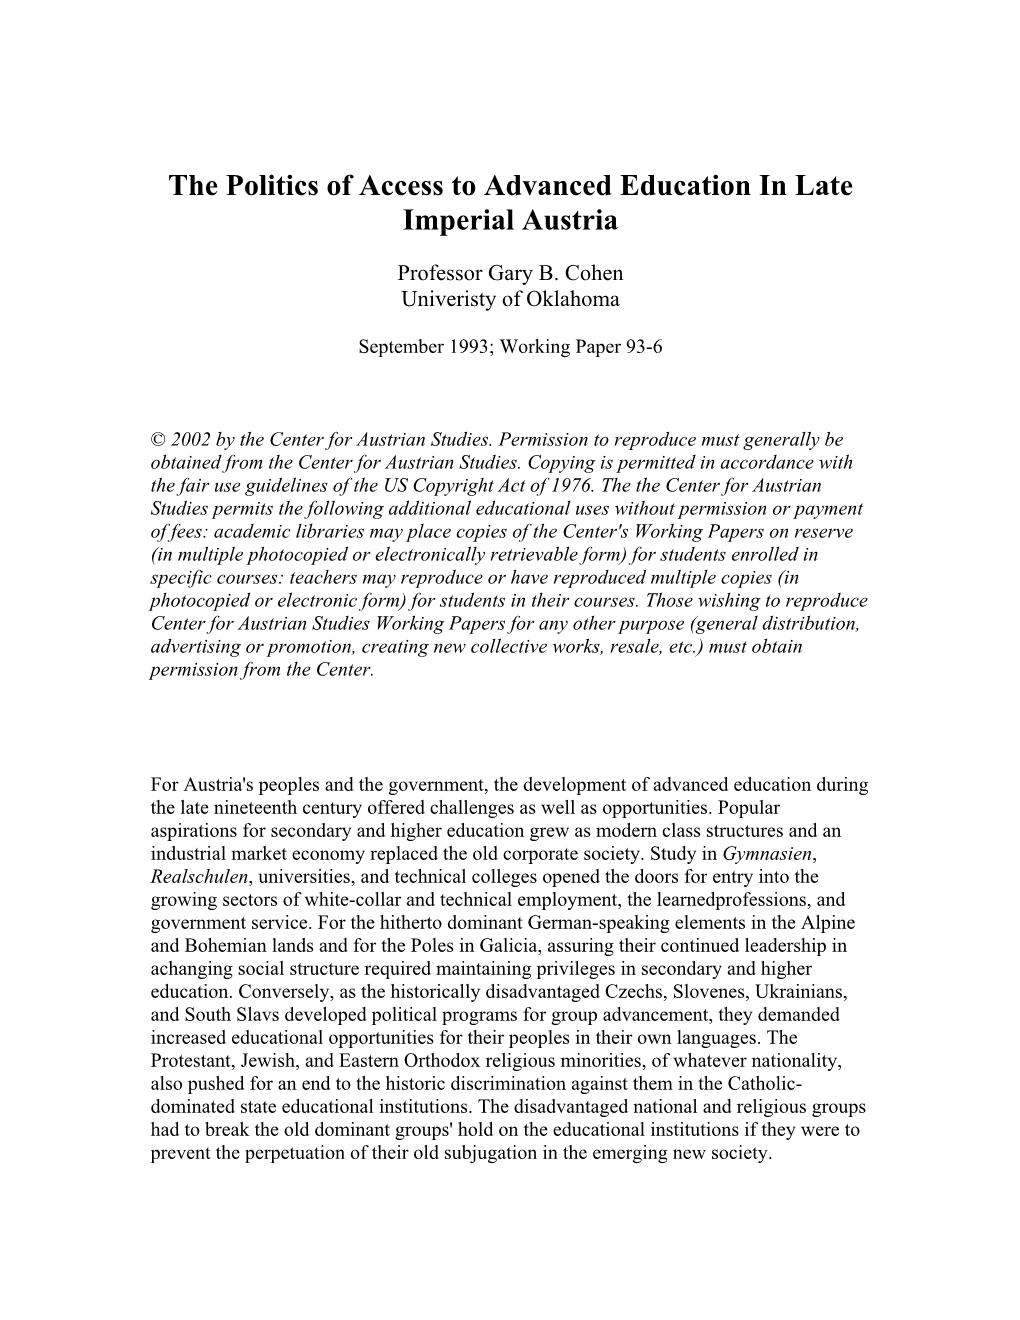 The Politics of Access to Advanced Education in Late Imperial Austria